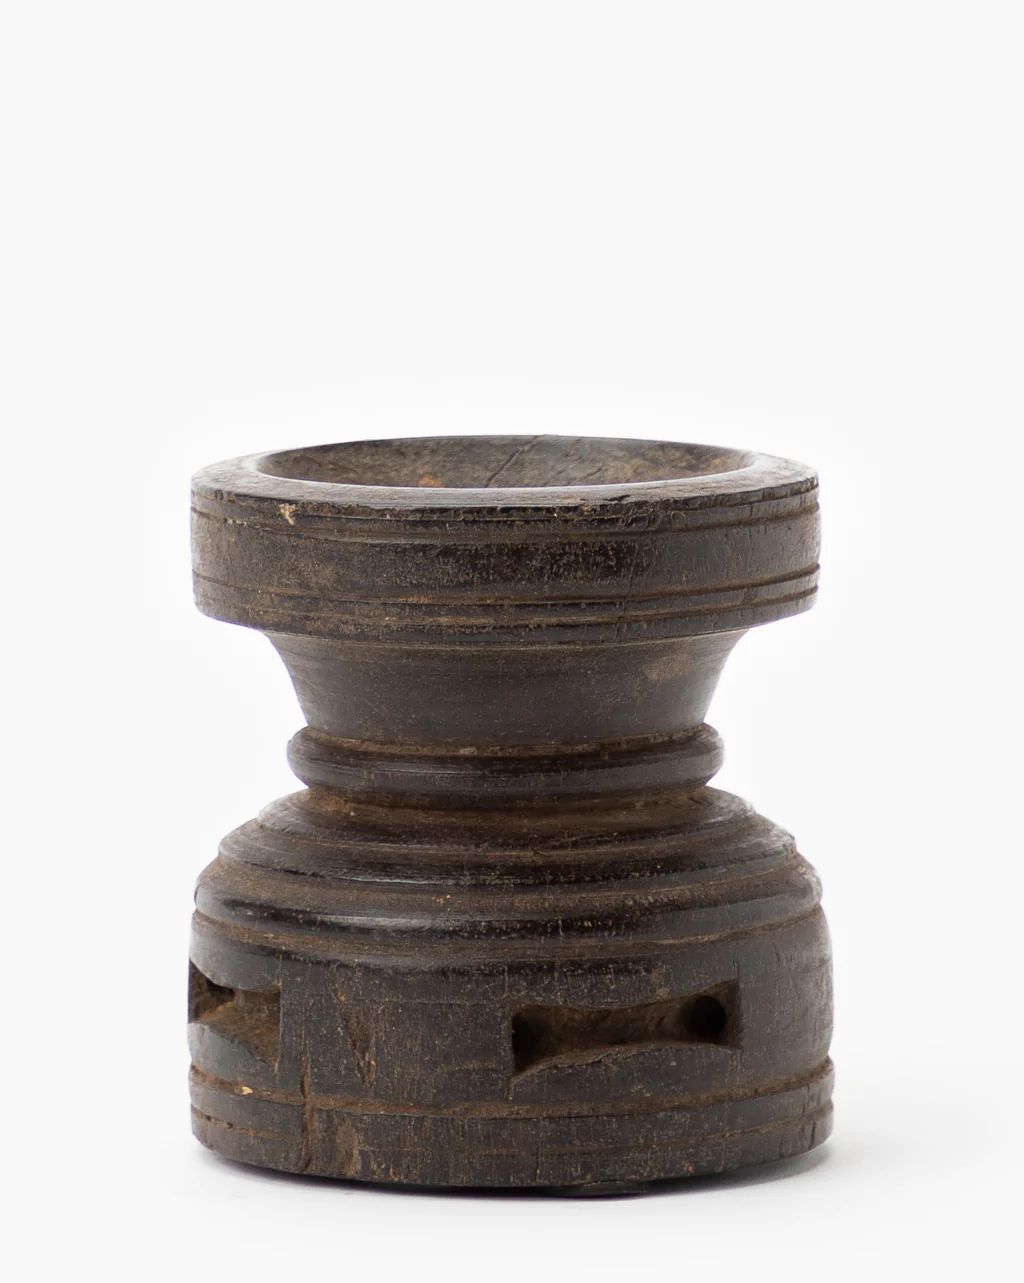 Carved Wooden Object | McGee & Co.